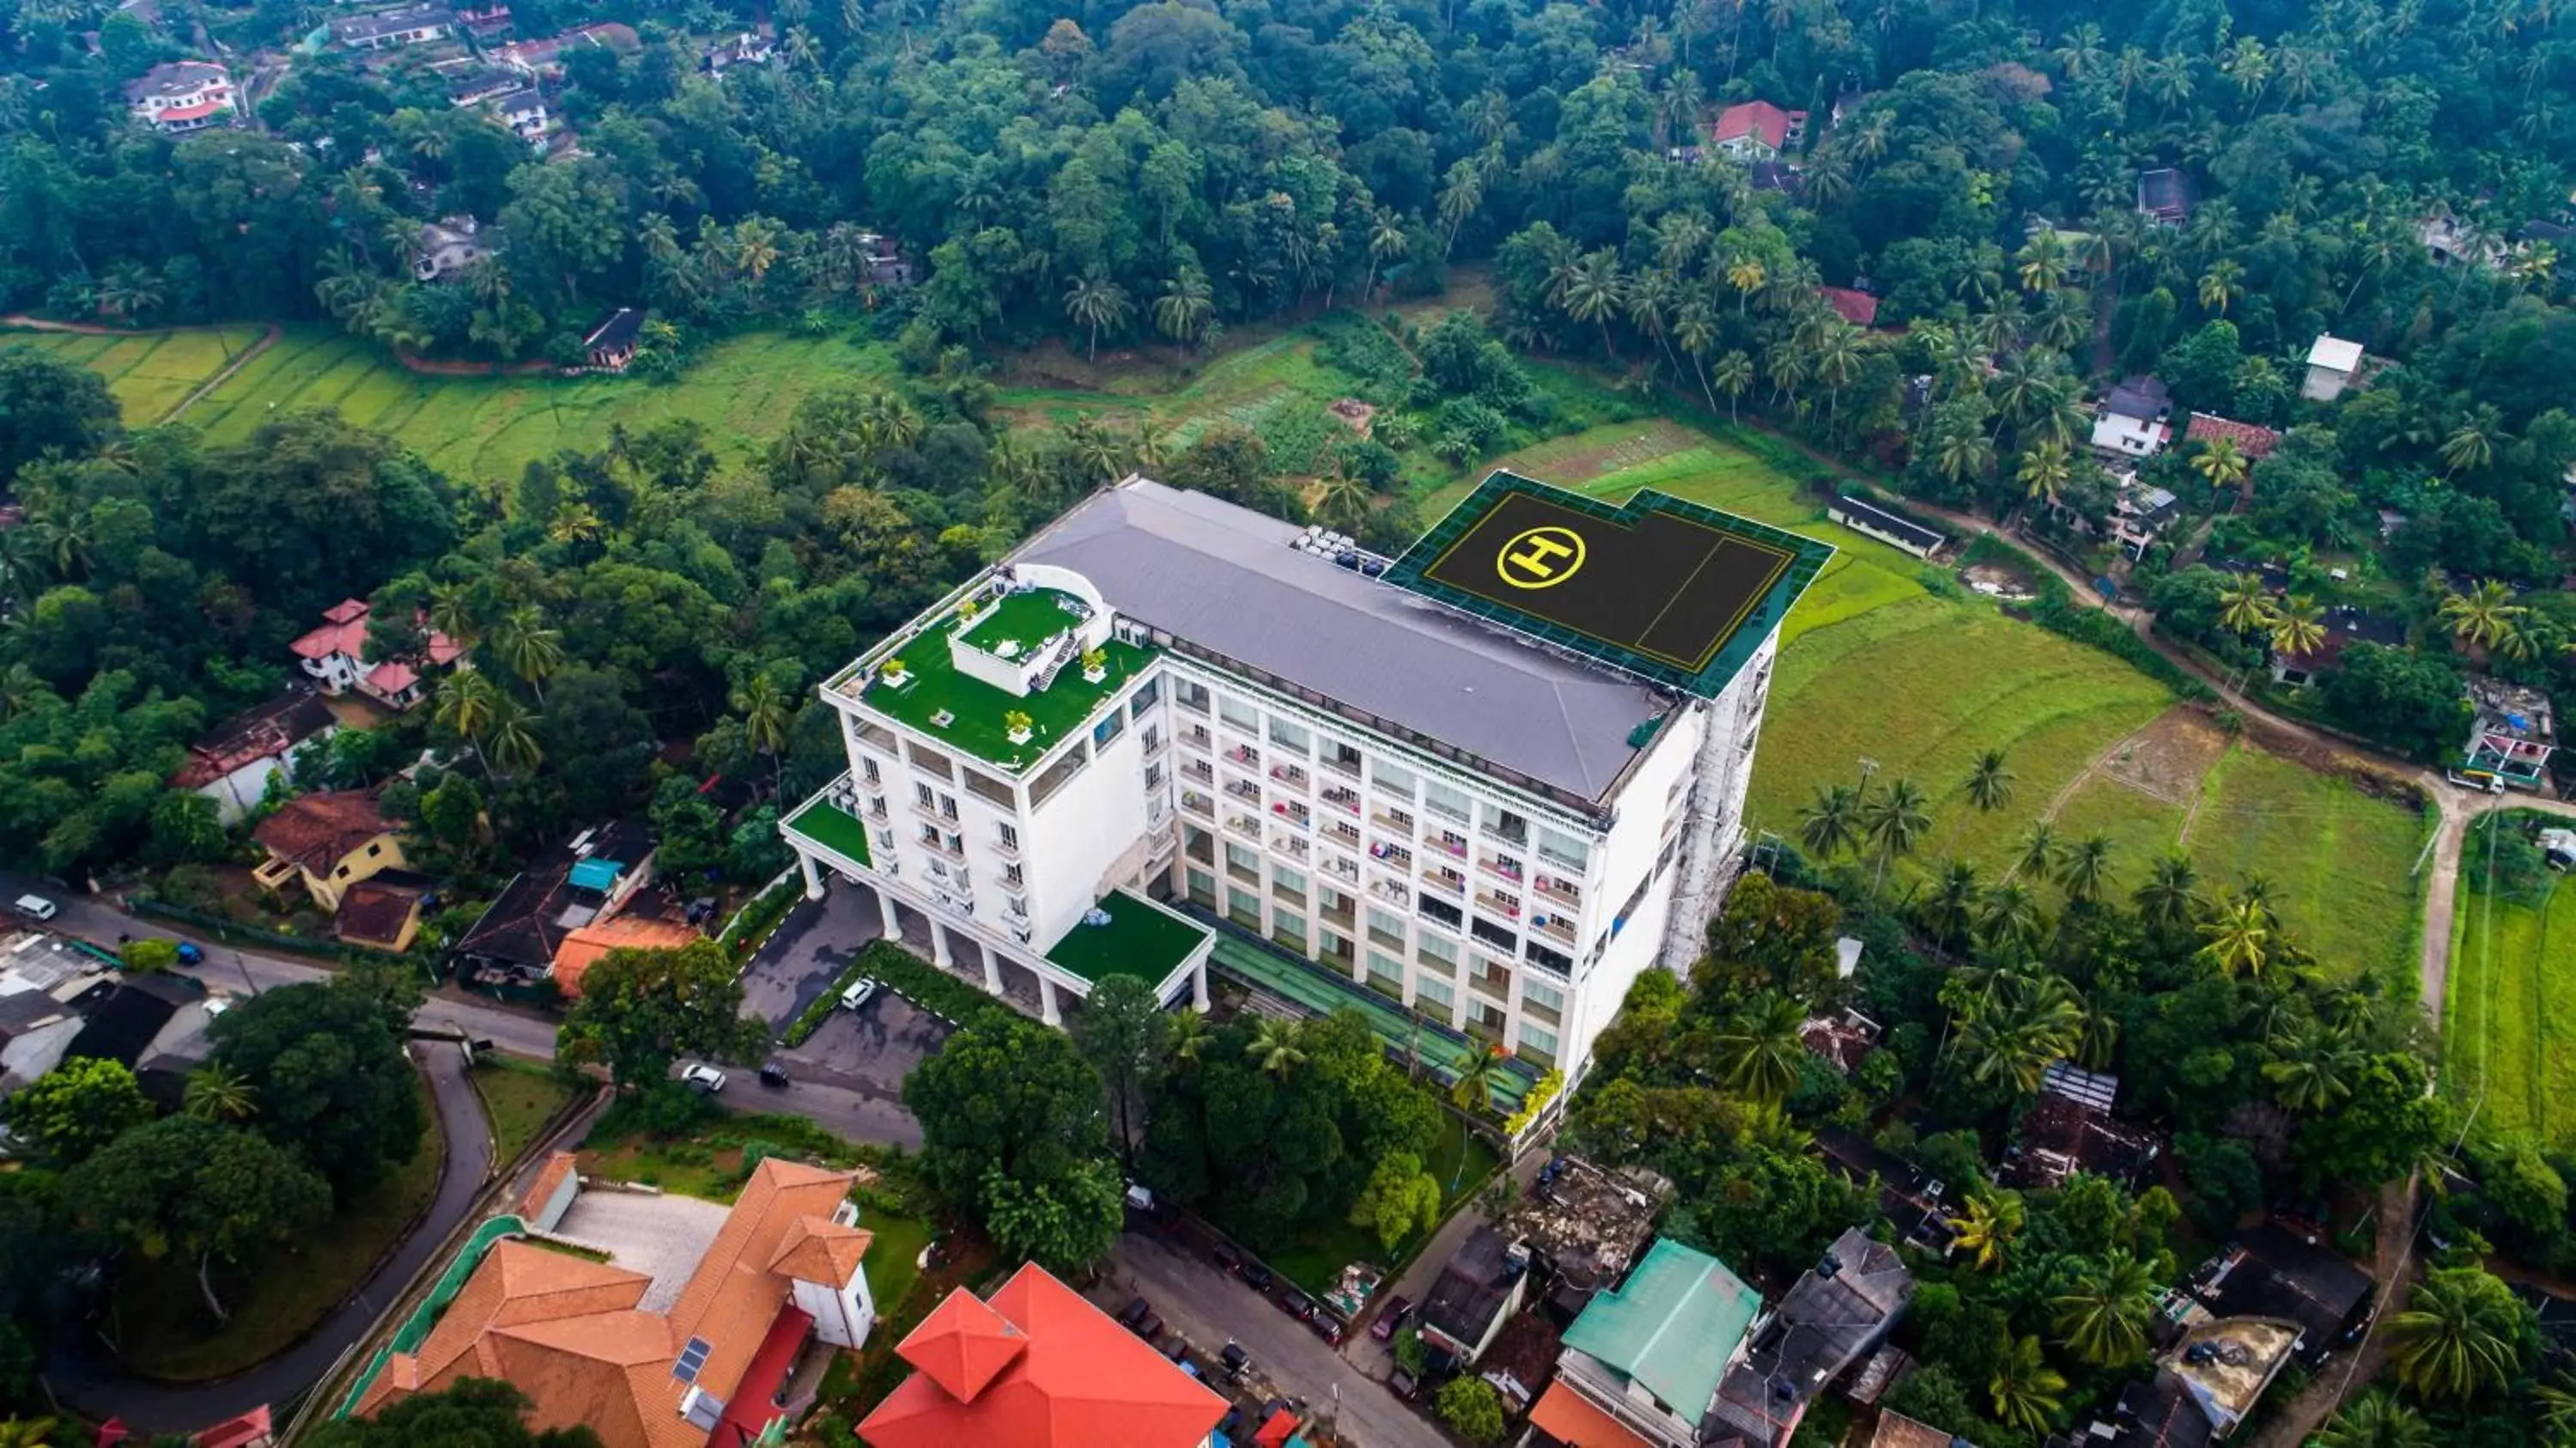 Property building, Bird's-eye View in The Golden Crown Hotel